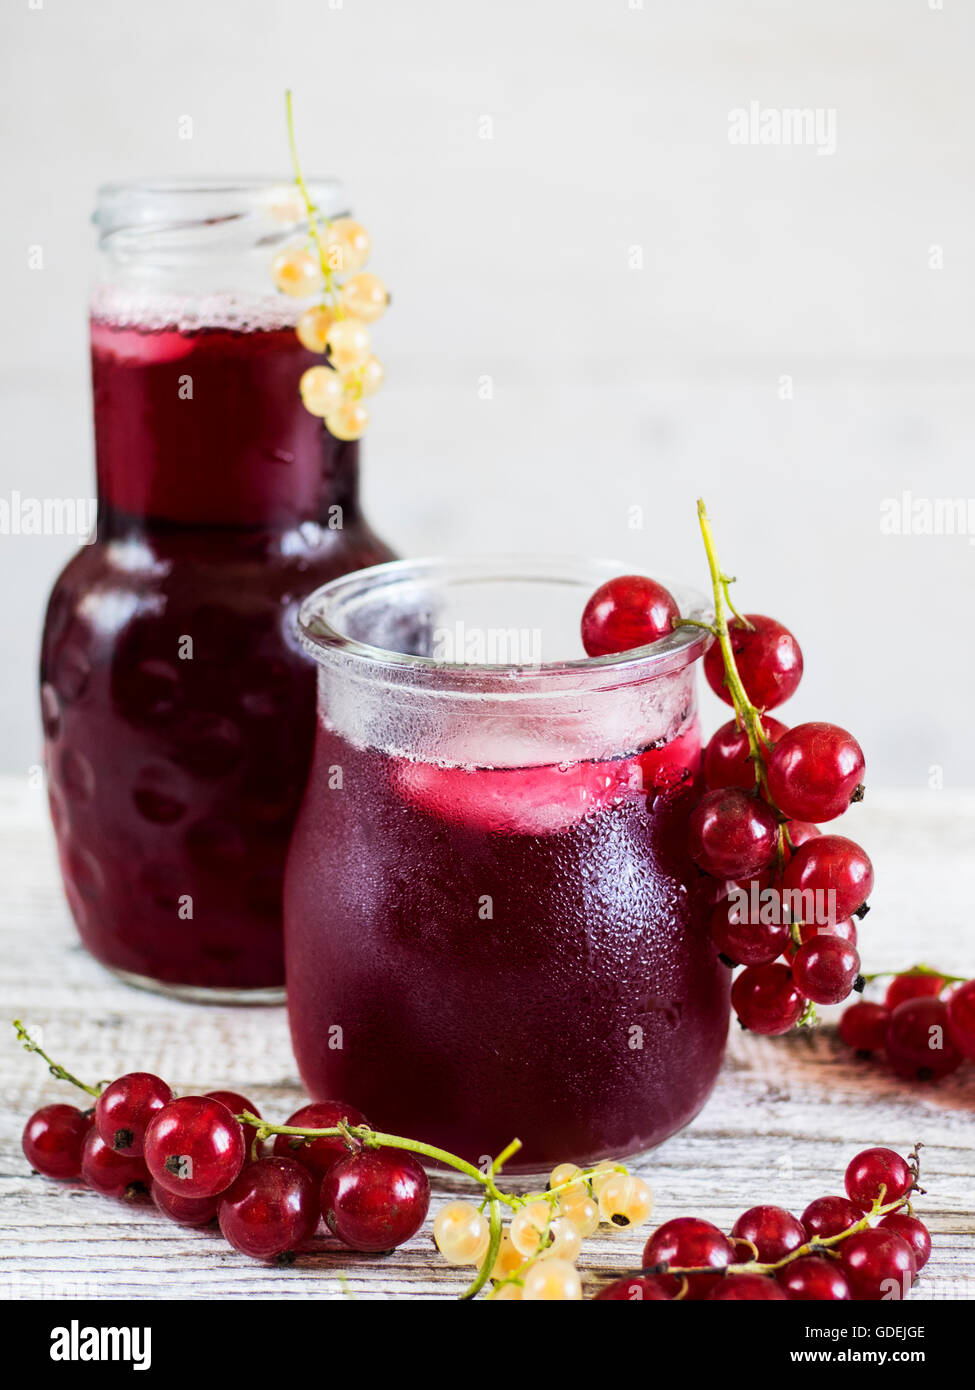 bottle and Glass of iced Hibiscus Tea Stock Photo